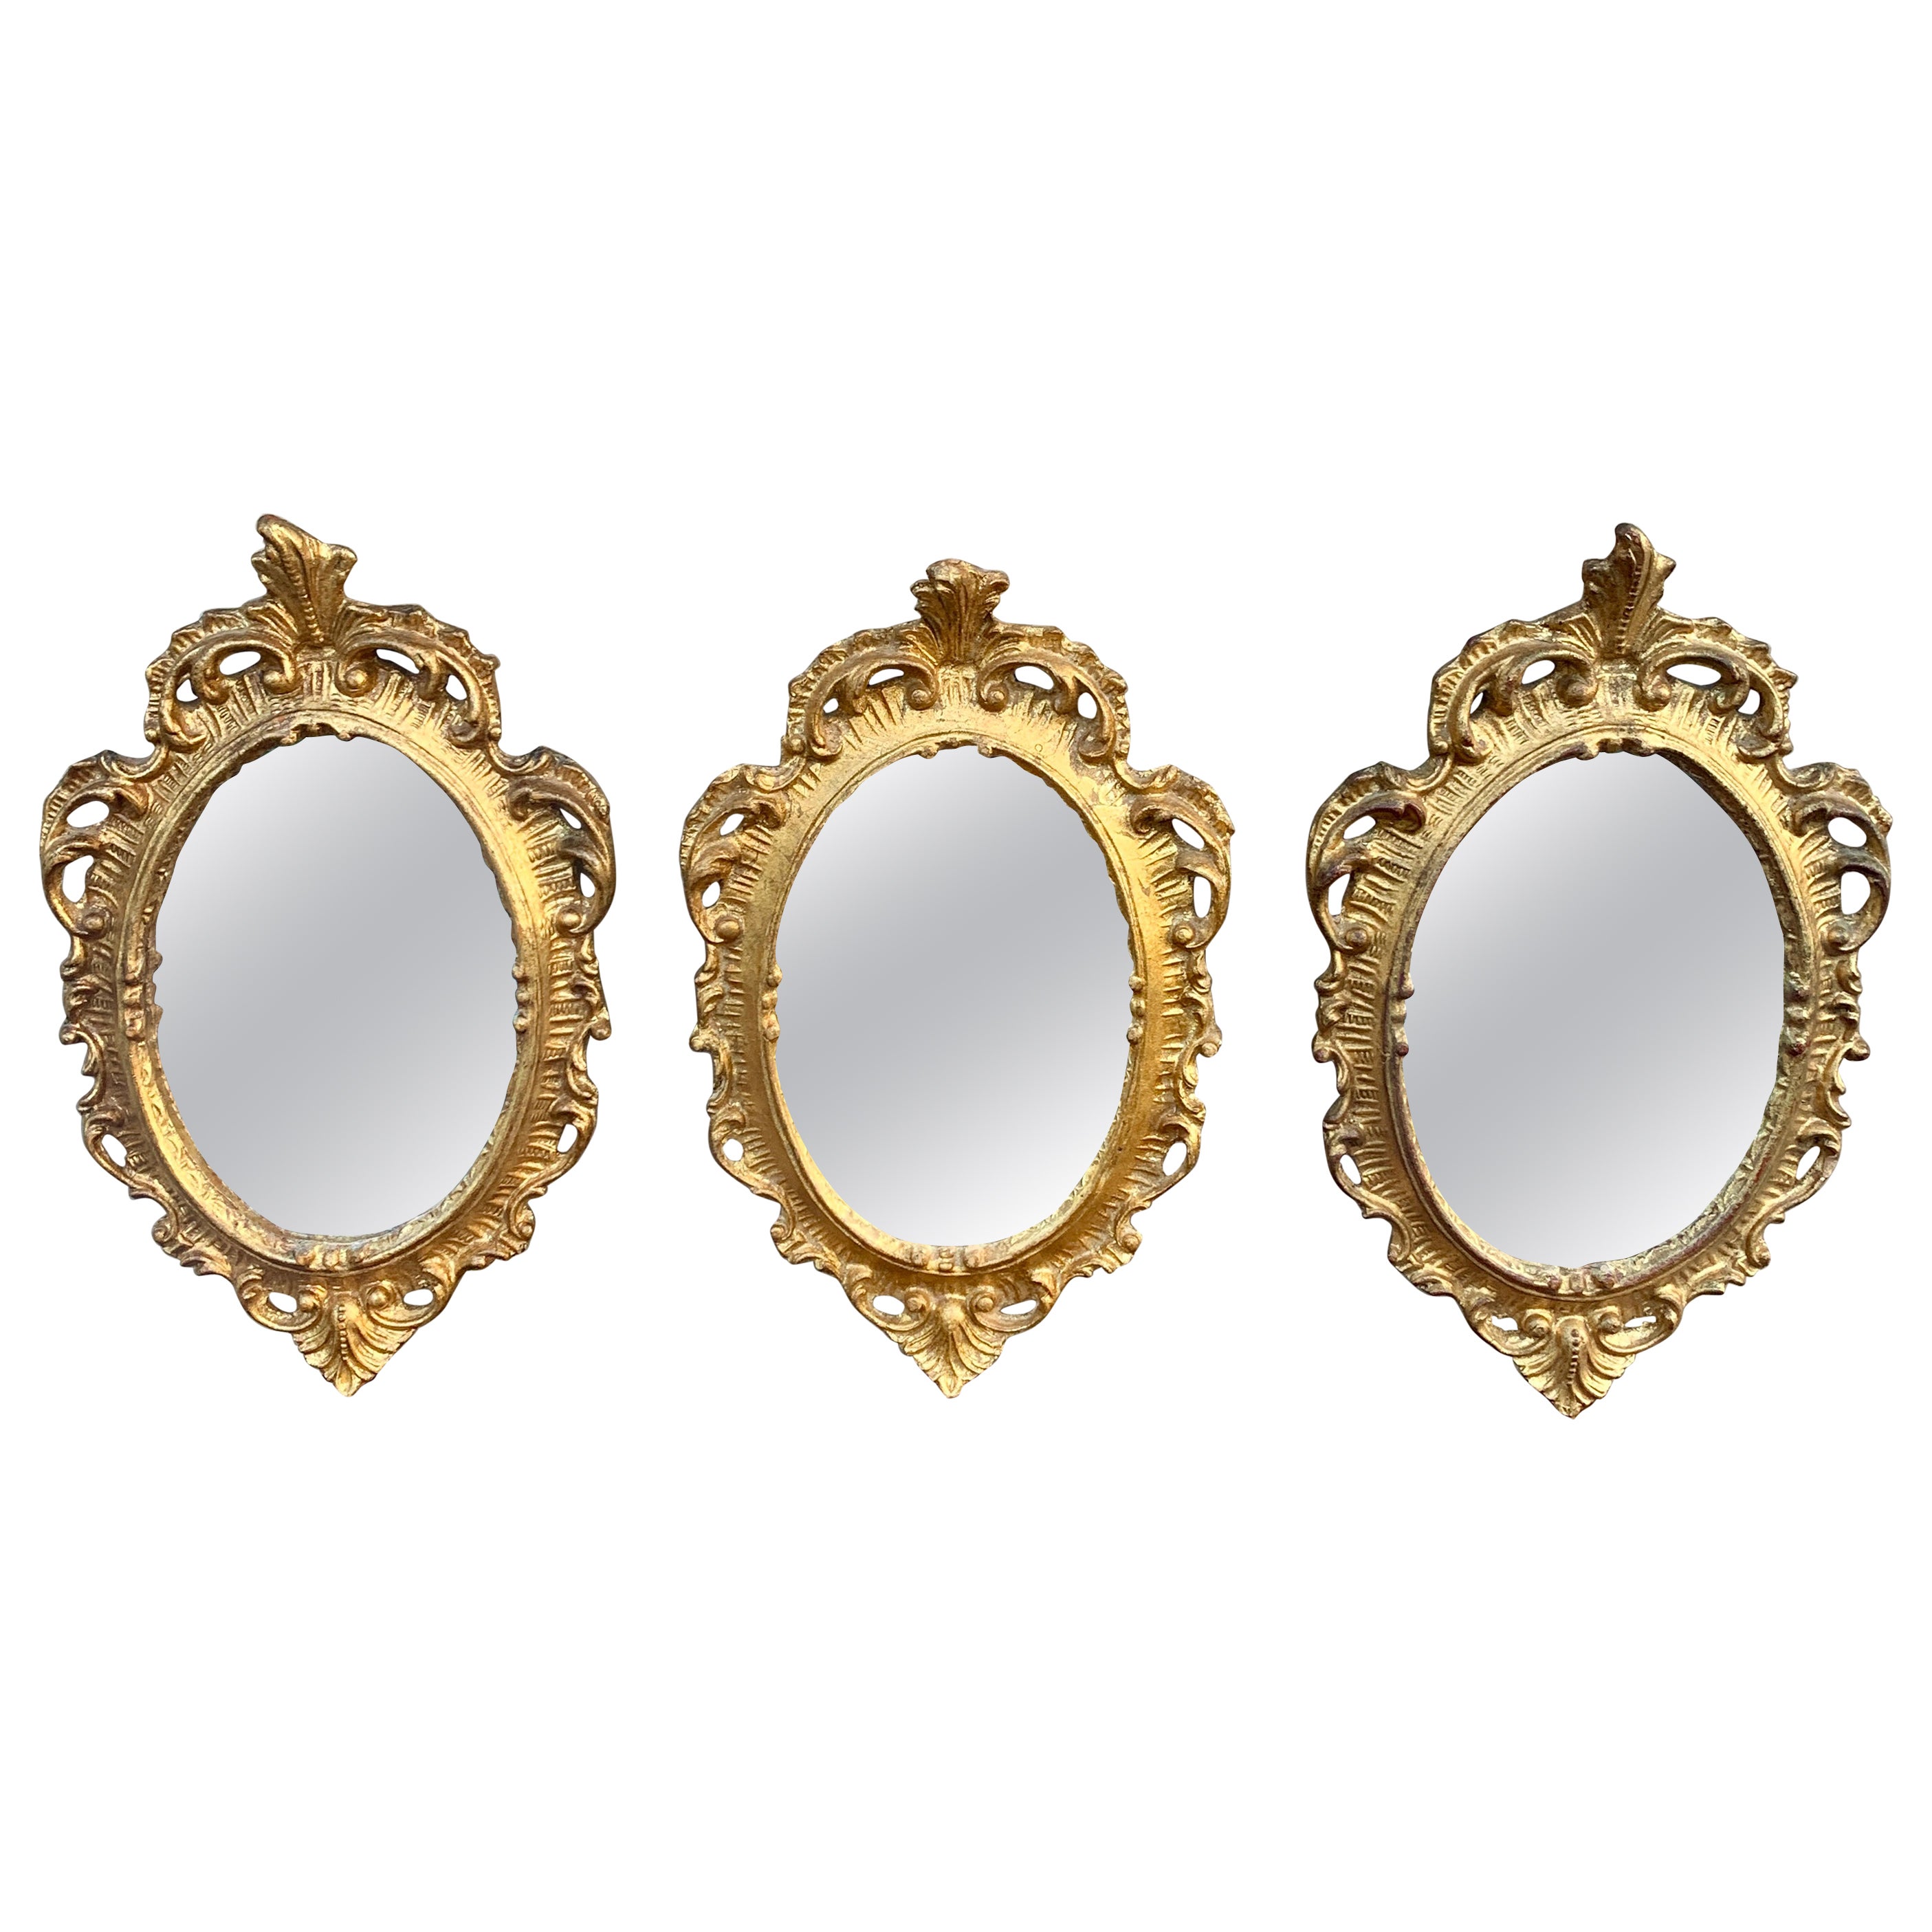 Italian Florentine Baroque Gold Giltwood Wall Mirrors, Set of Three For Sale